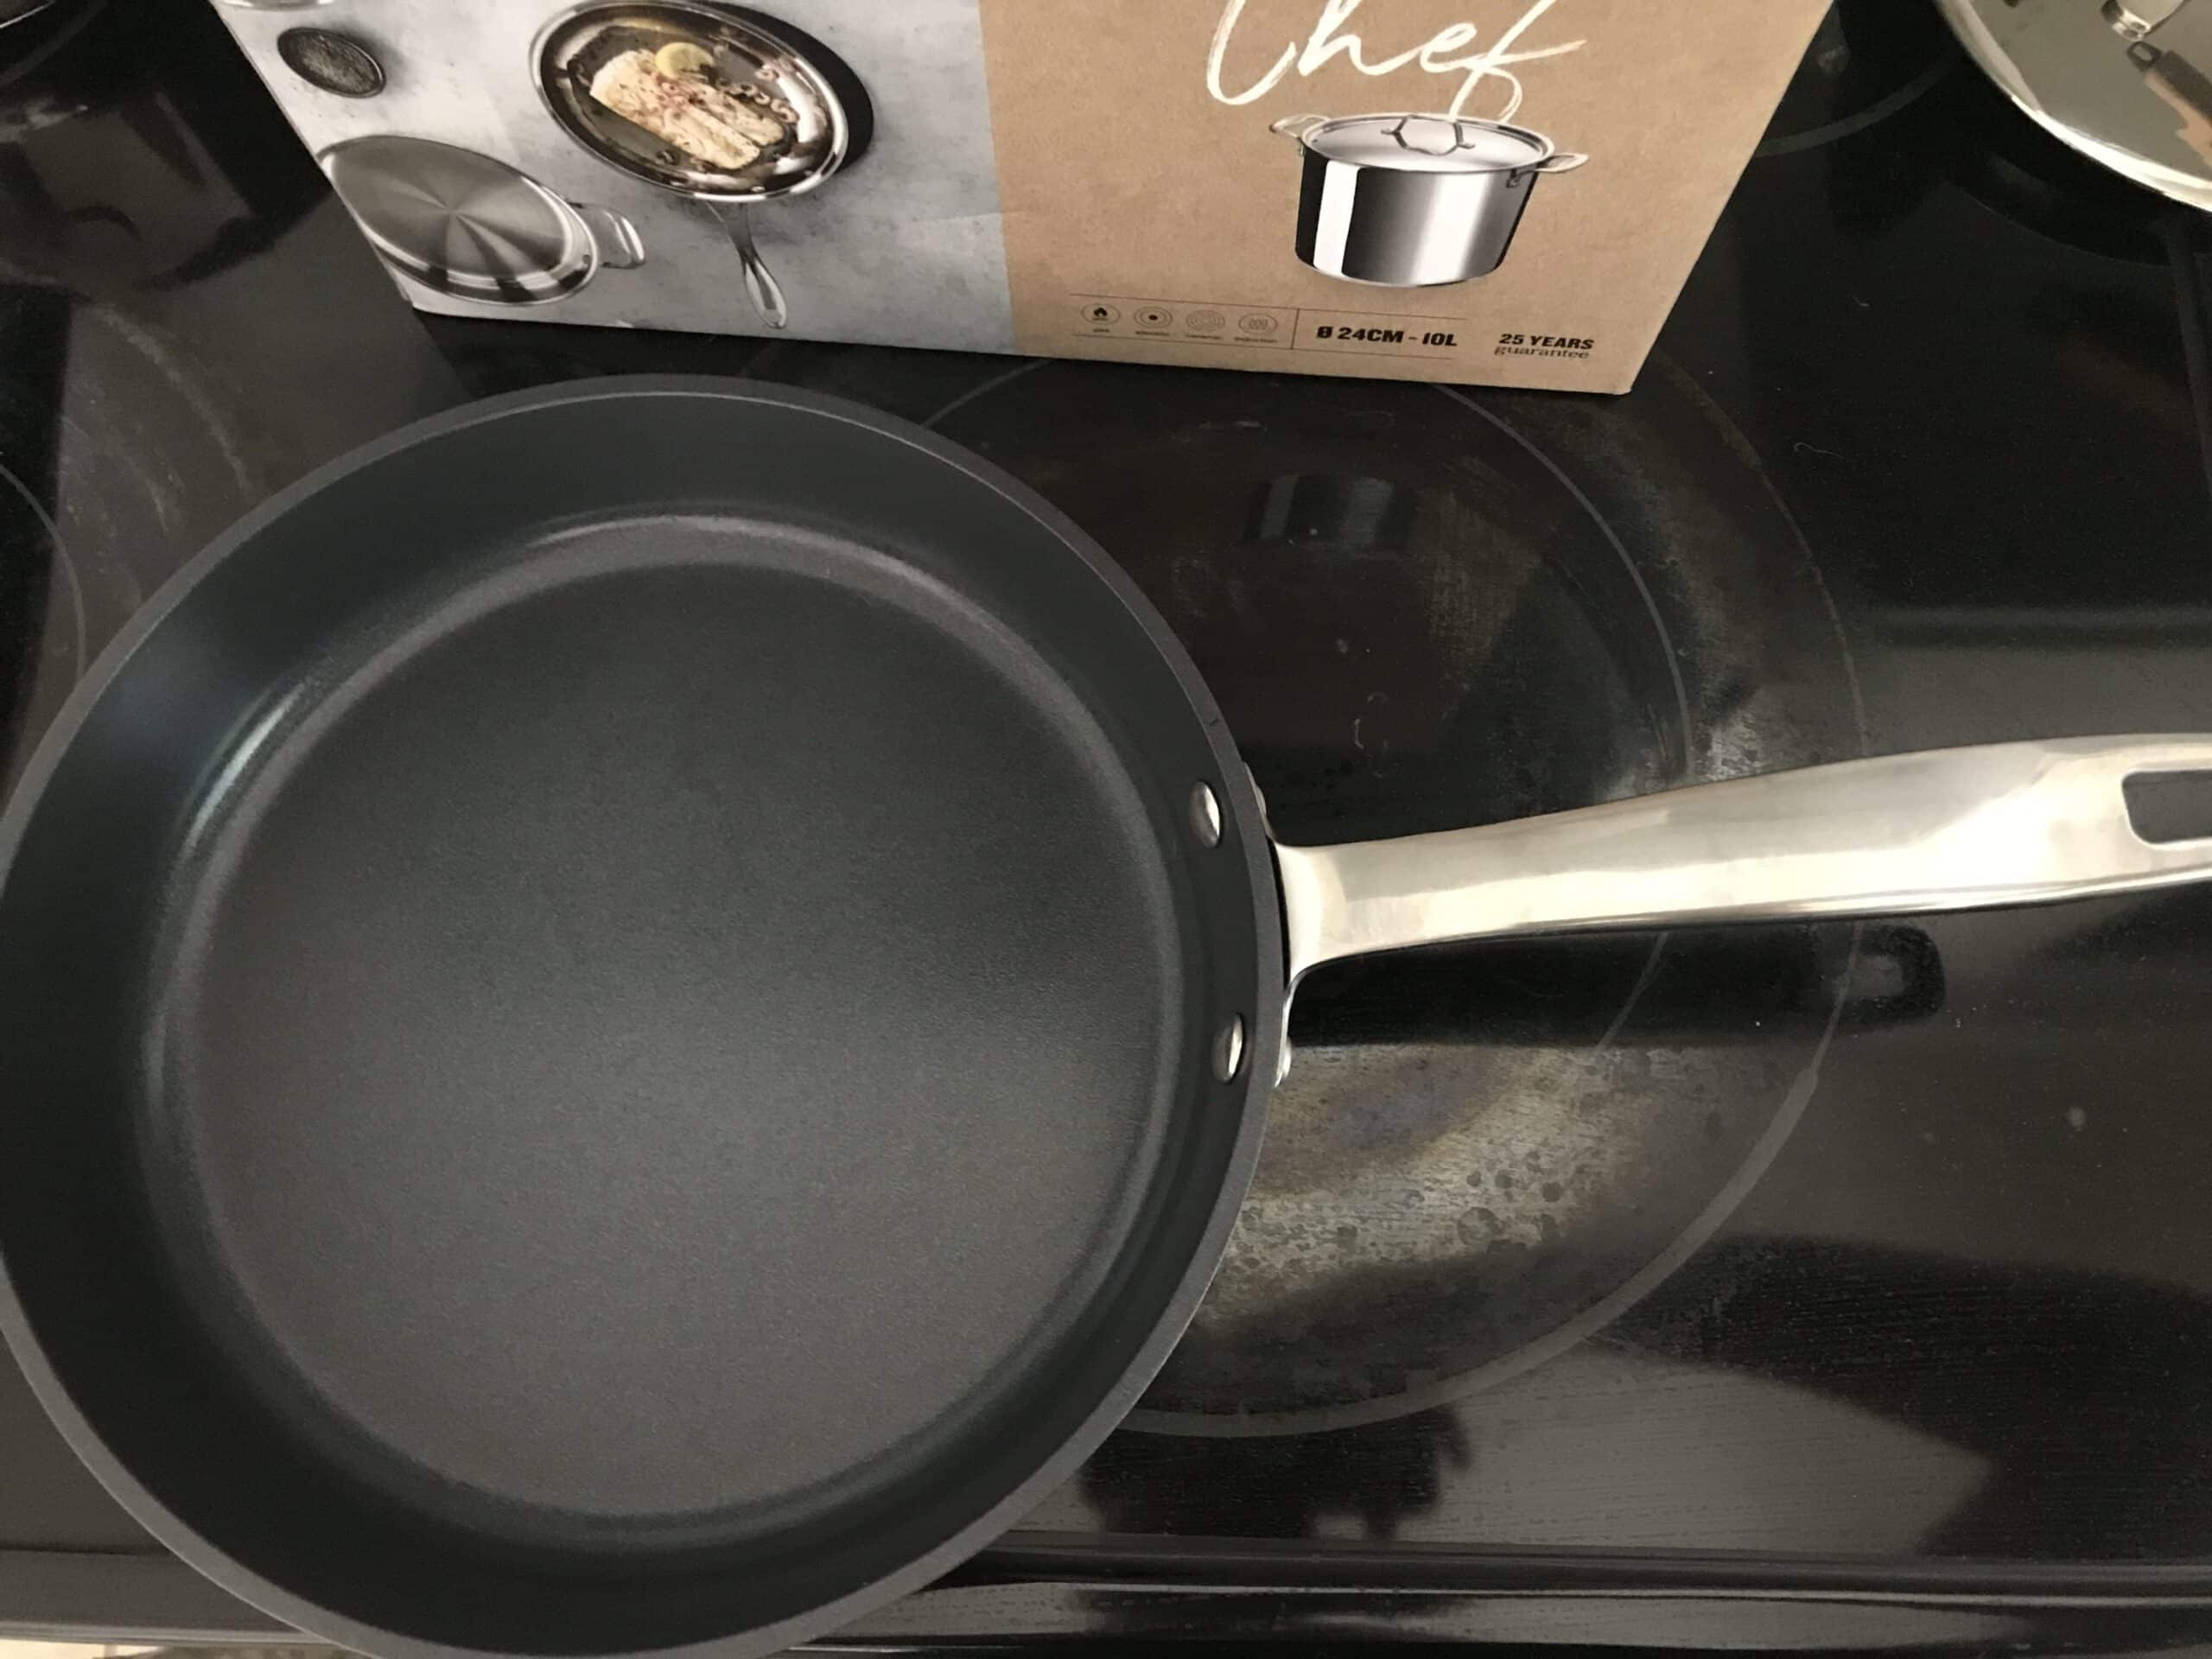 Xtrema vs. Caraway: Which Non-Toxic Cookware Is Better? - Prudent